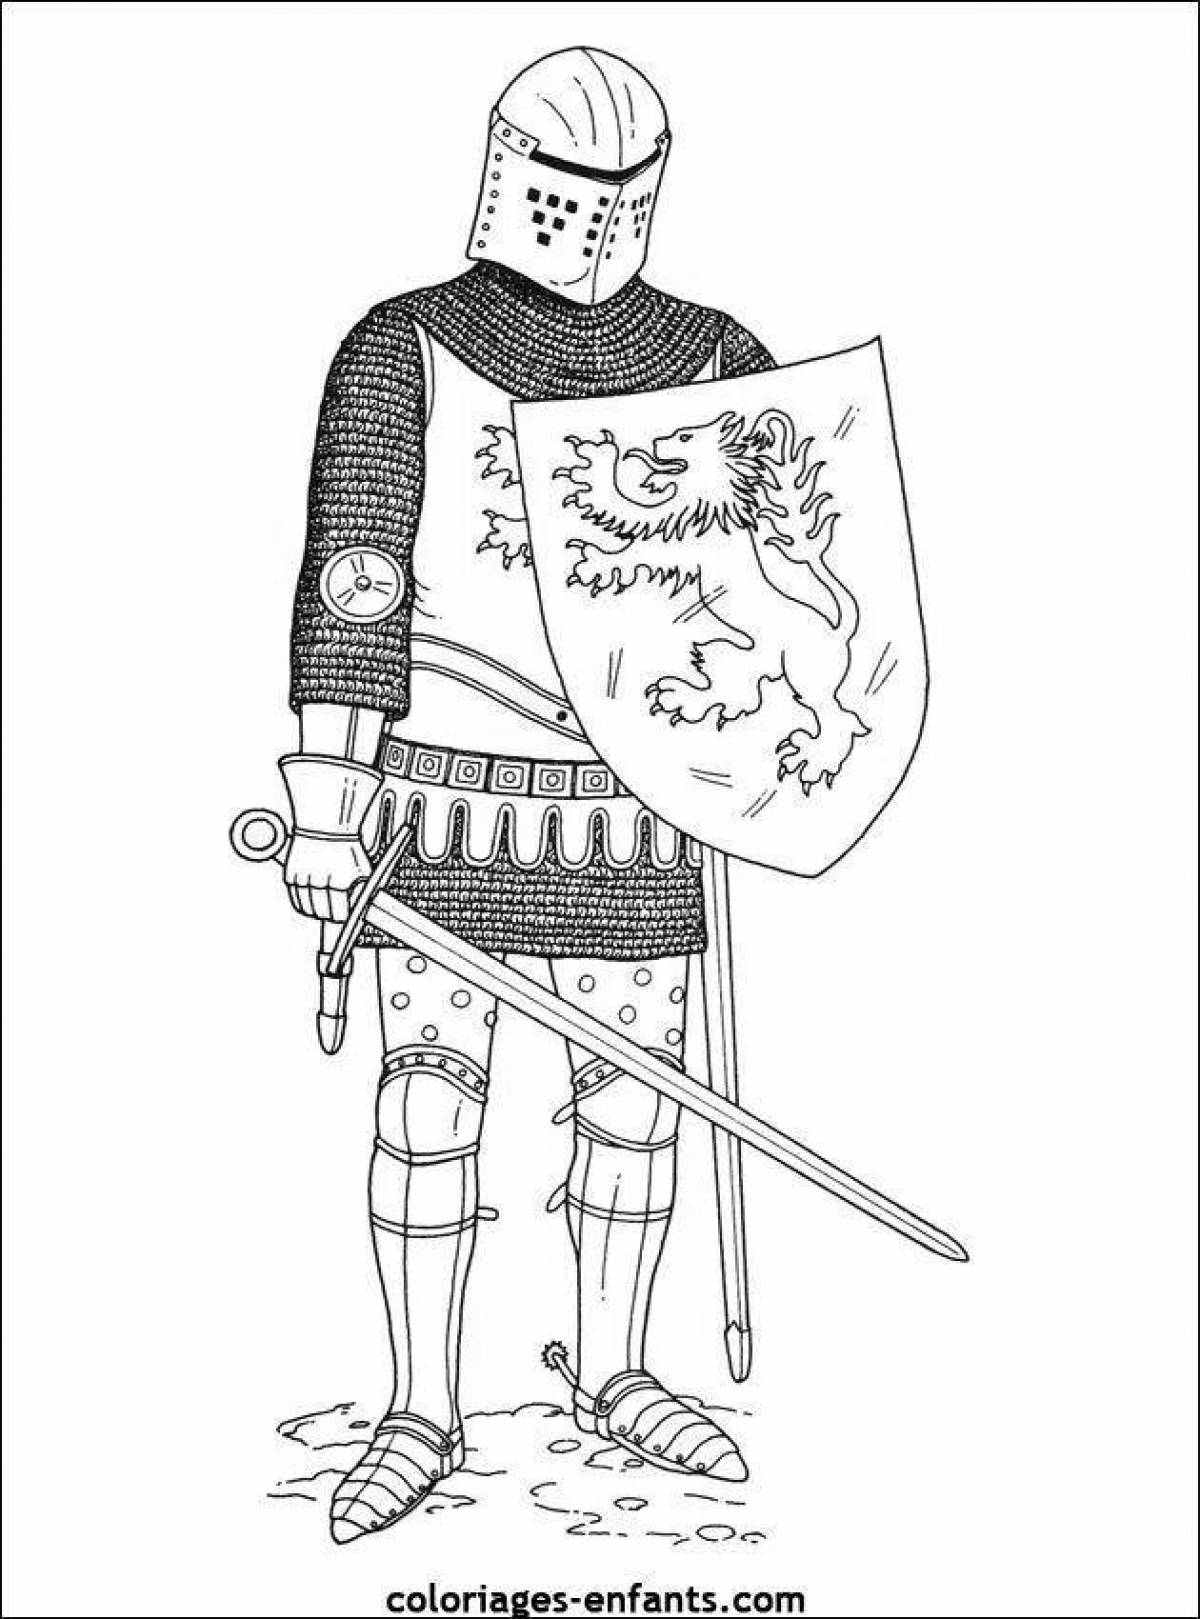 Coloring book decorative medieval knights